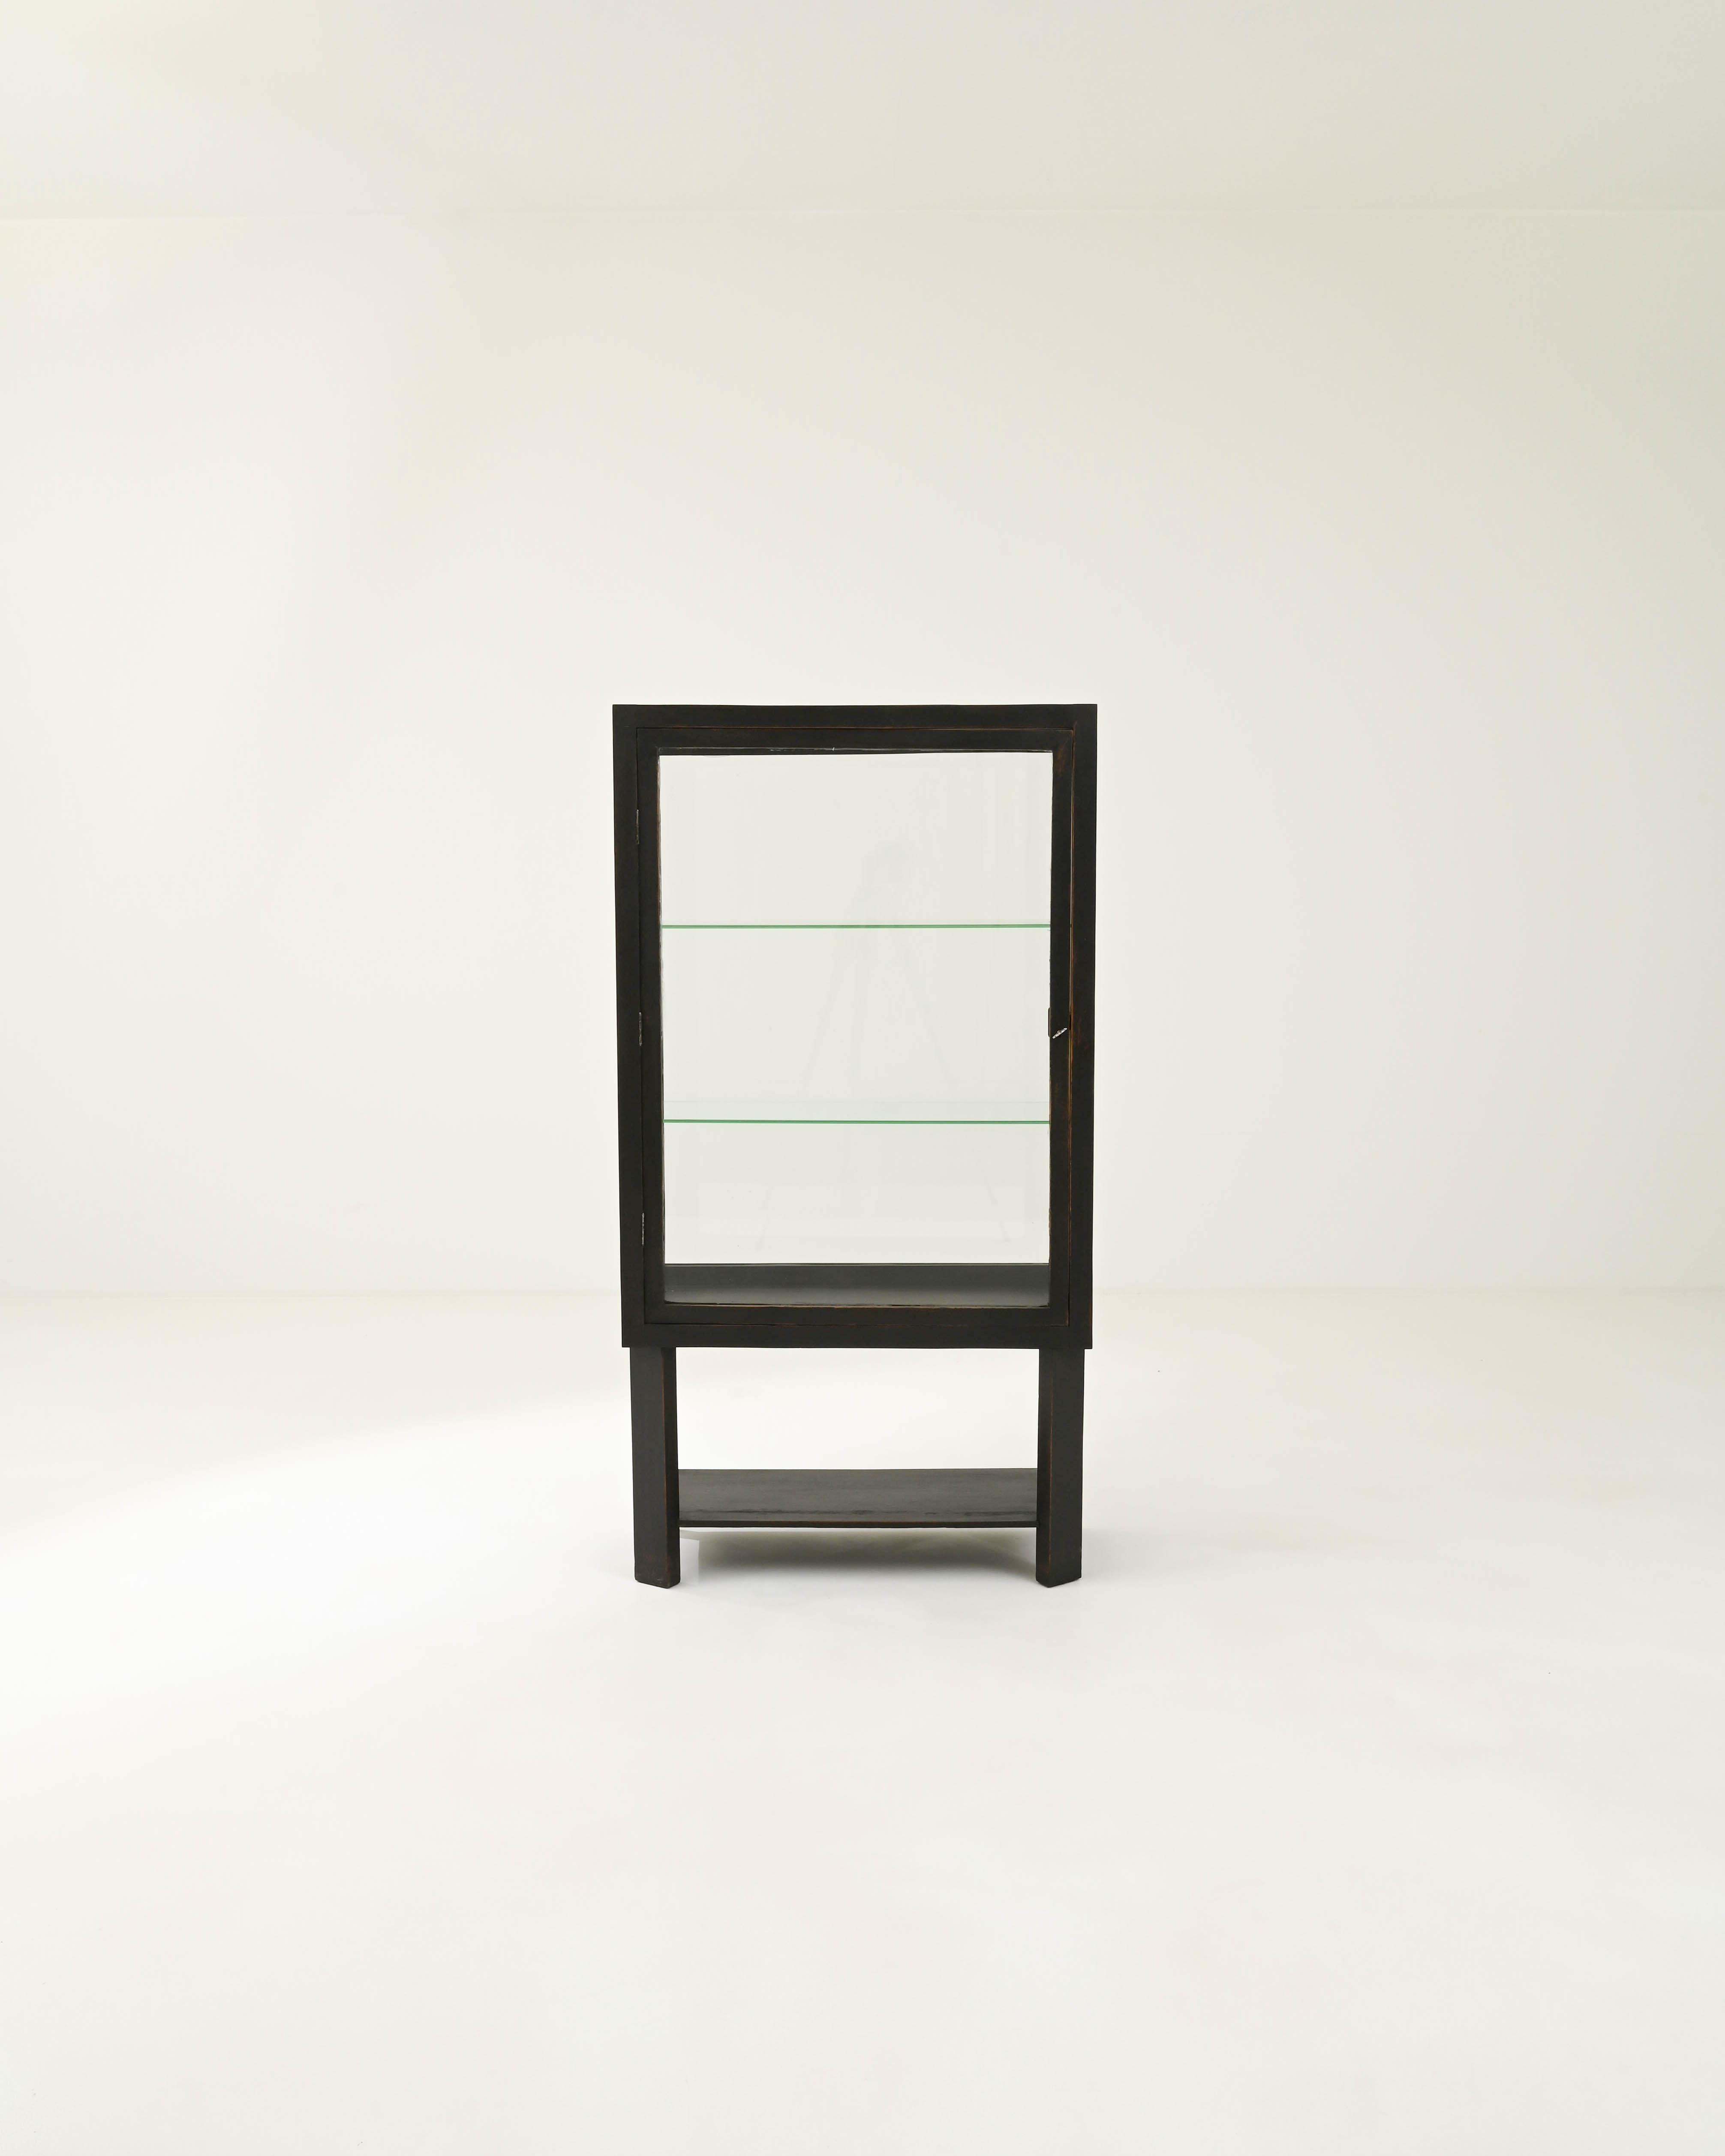 The sleek minimalist design of this vintage wooden vitrine is softened by a subtle patina. Built in France in the 20th century, the stripped-back lines of the cabinet form a bold frame which draws the eye to the objects placed within. Windows on all